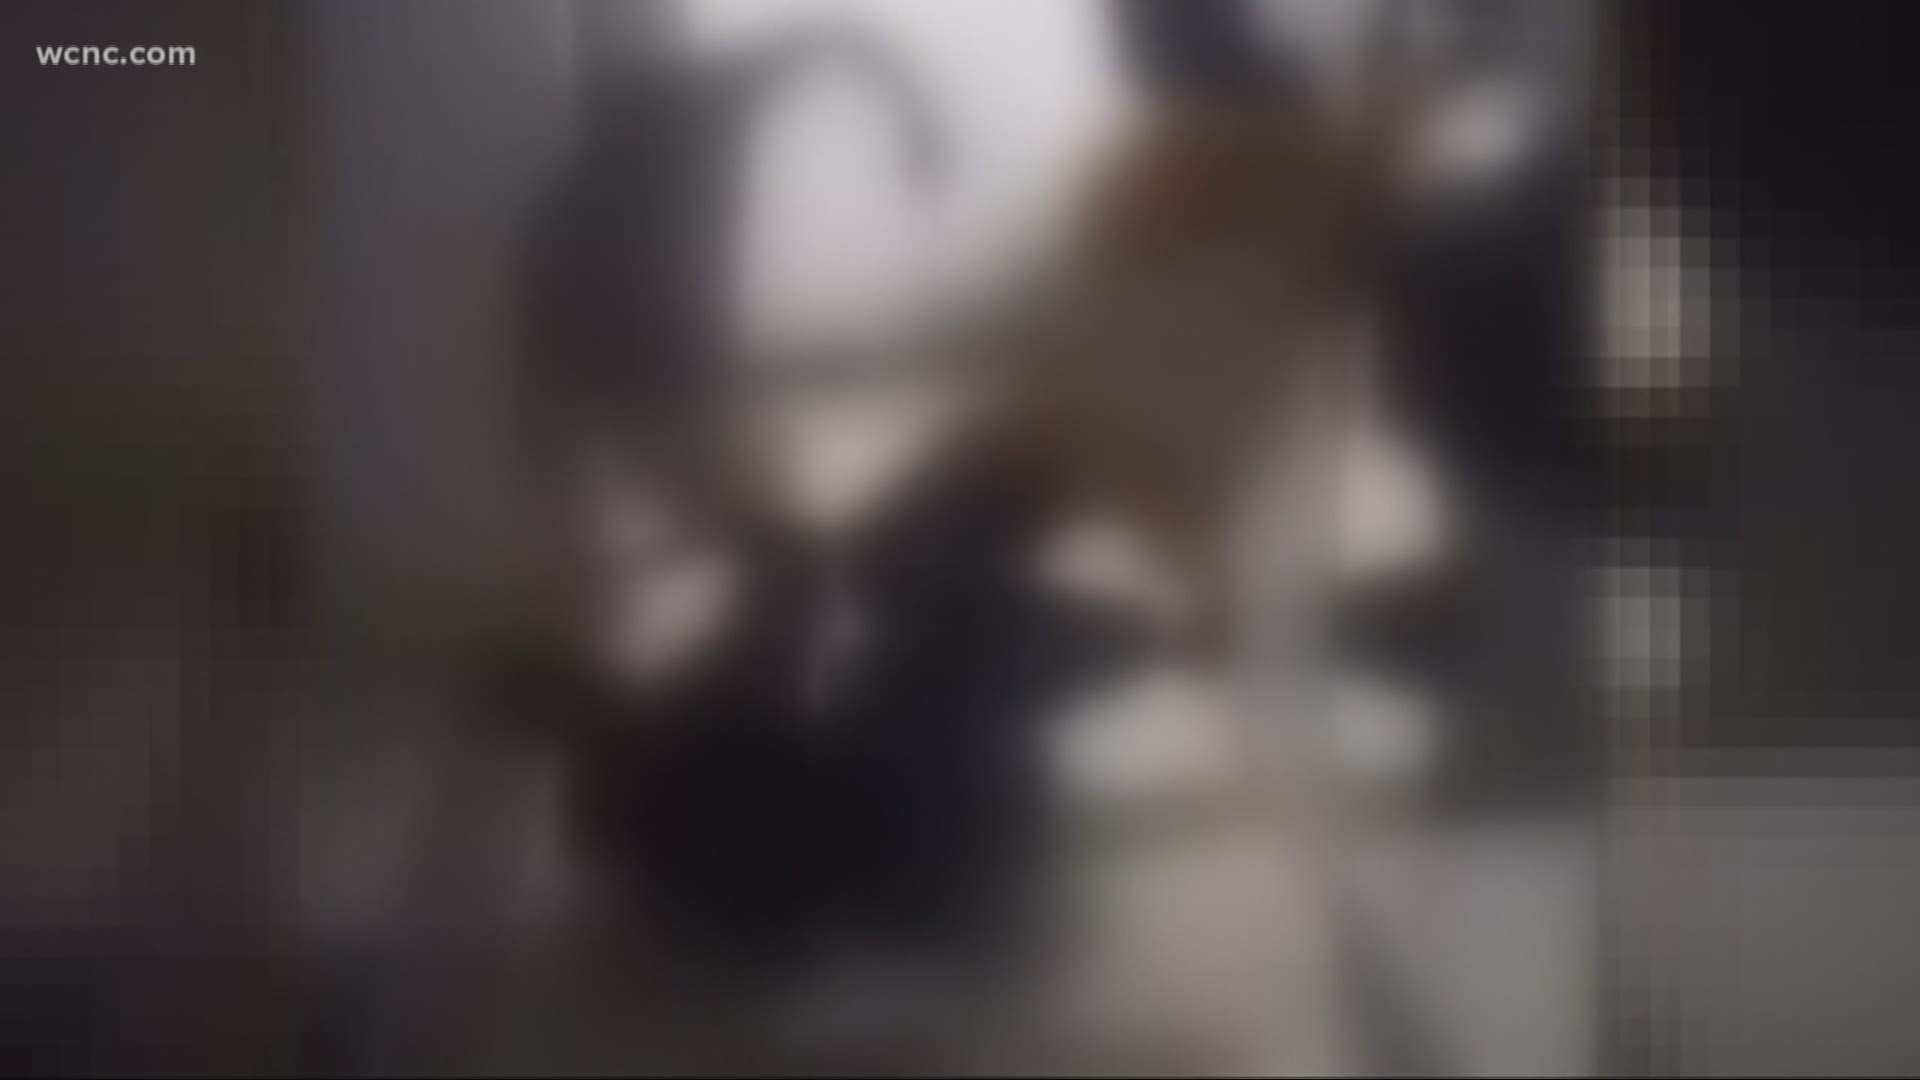 A local teen is recovering after a brutal high school locker room fight that was caught on camera.